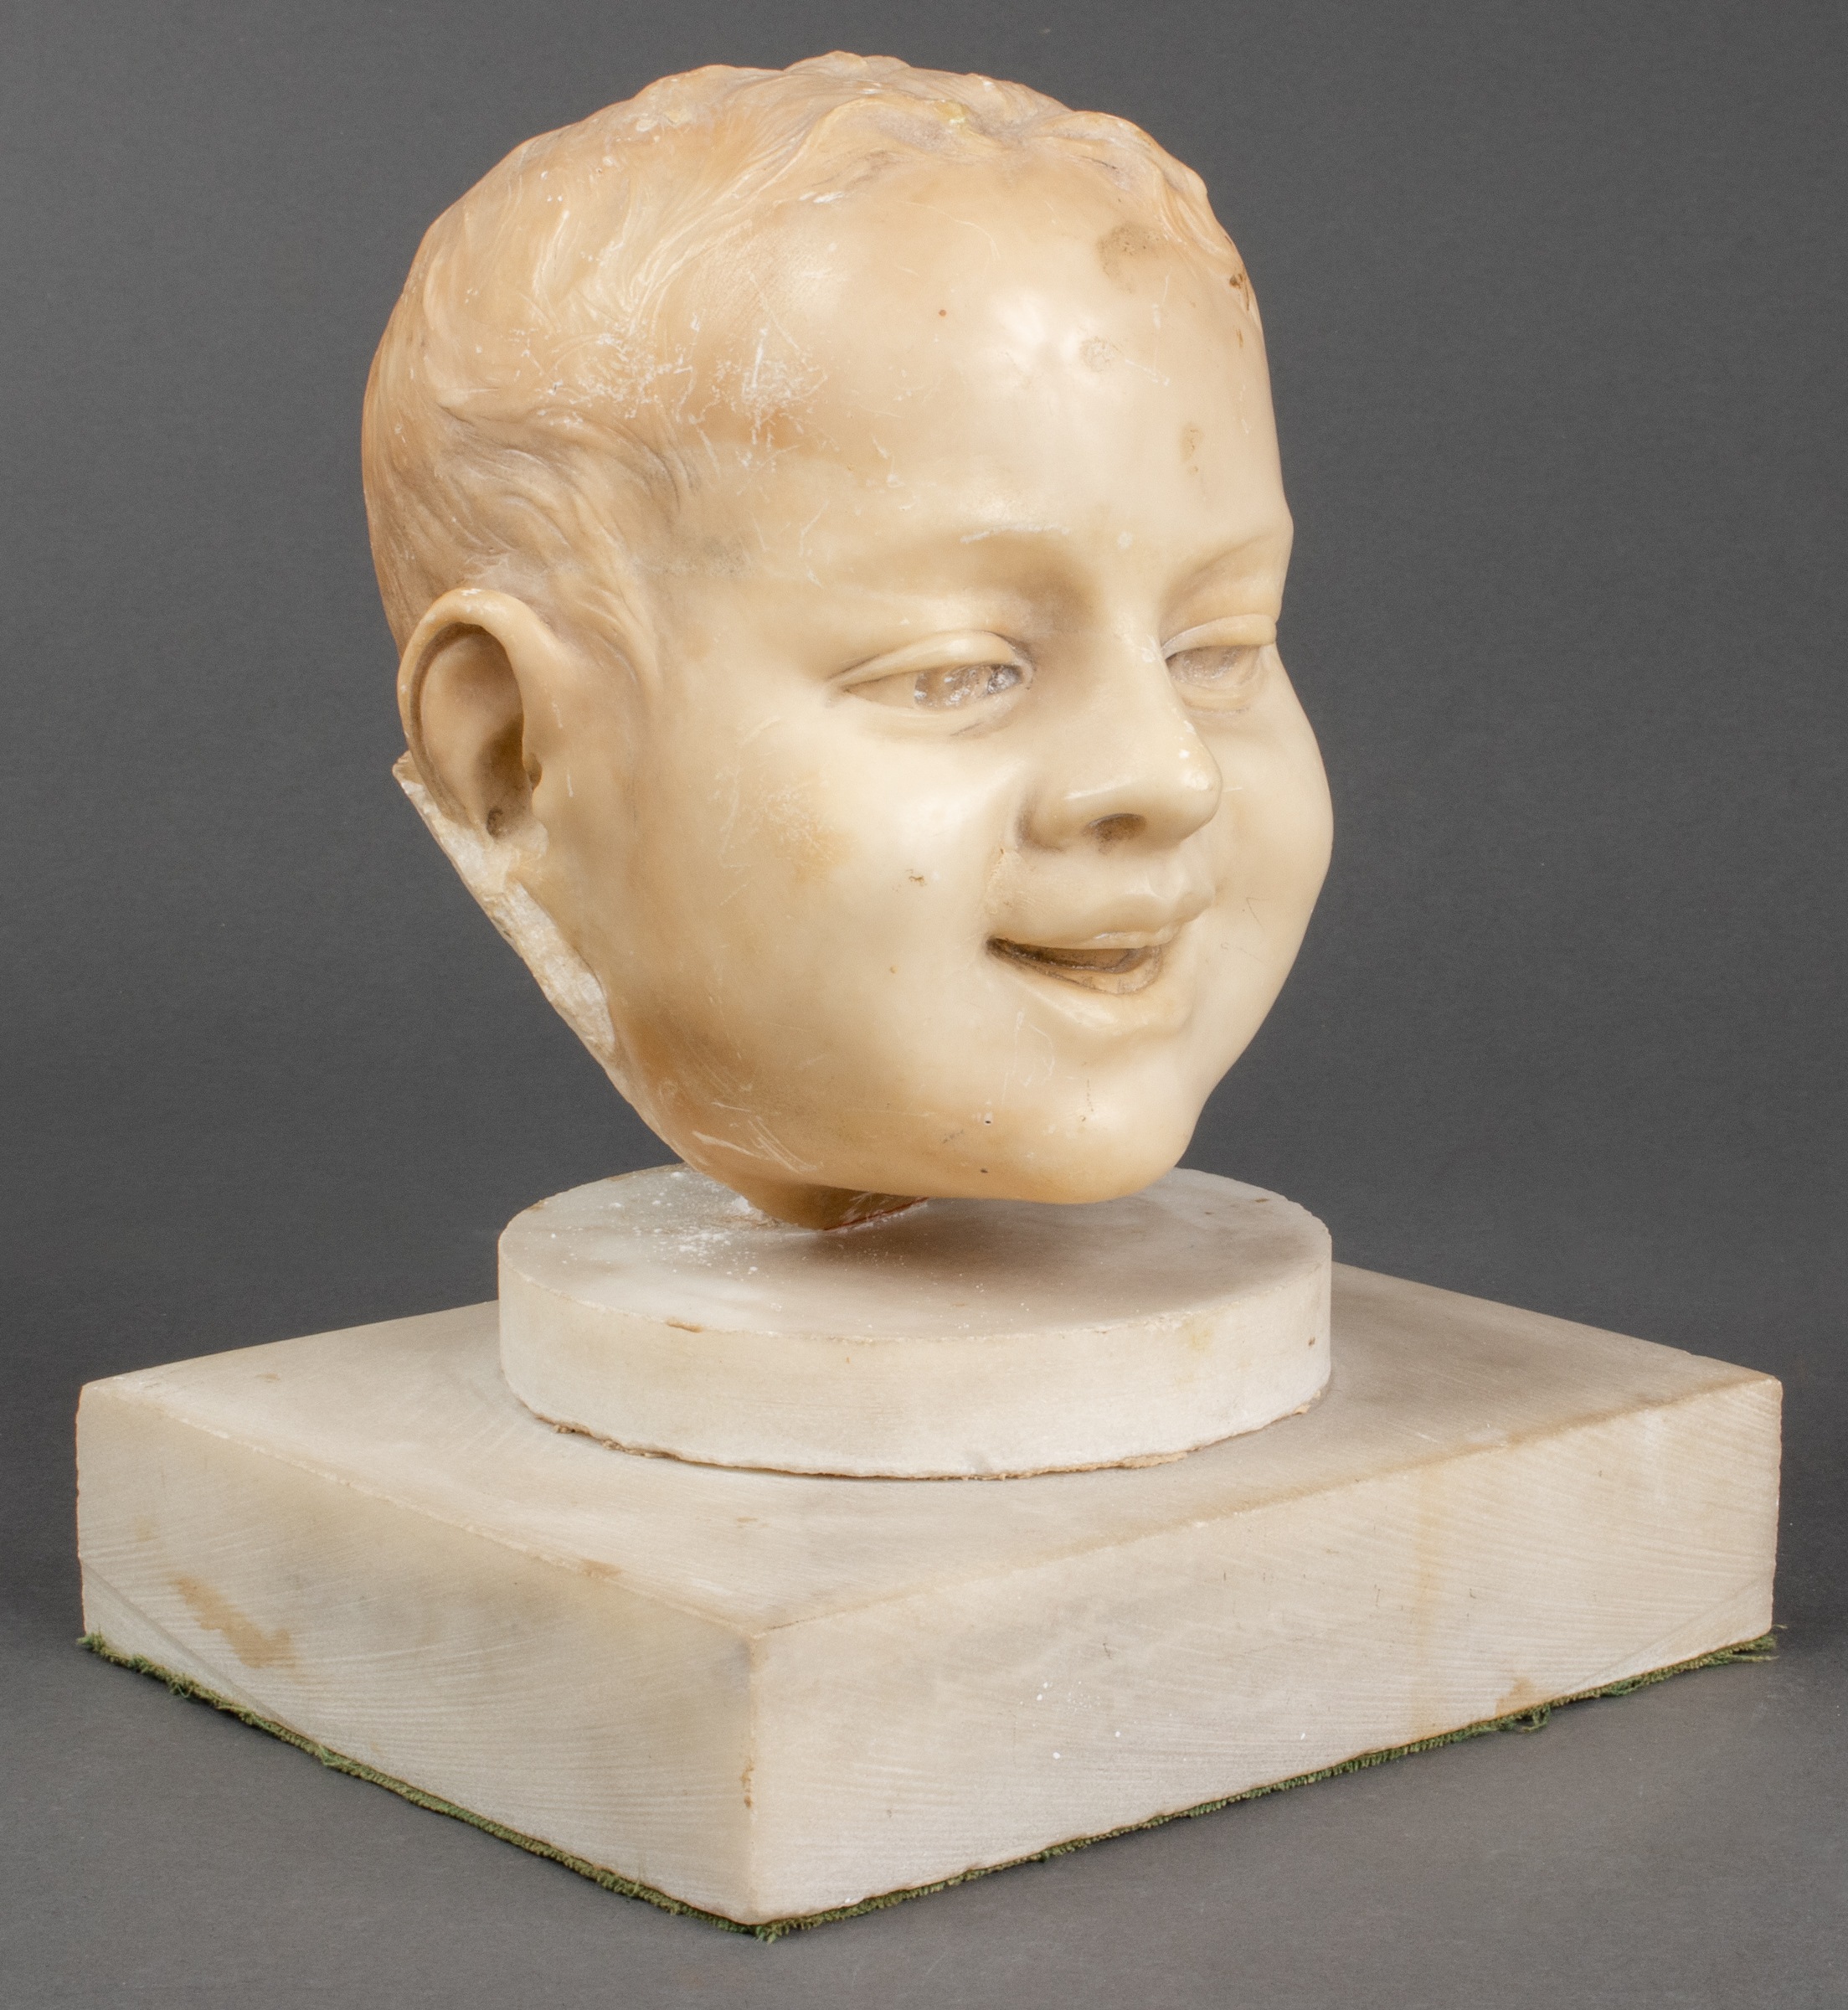 CARVED MARBLE FRAGMENT OF A YOUNG